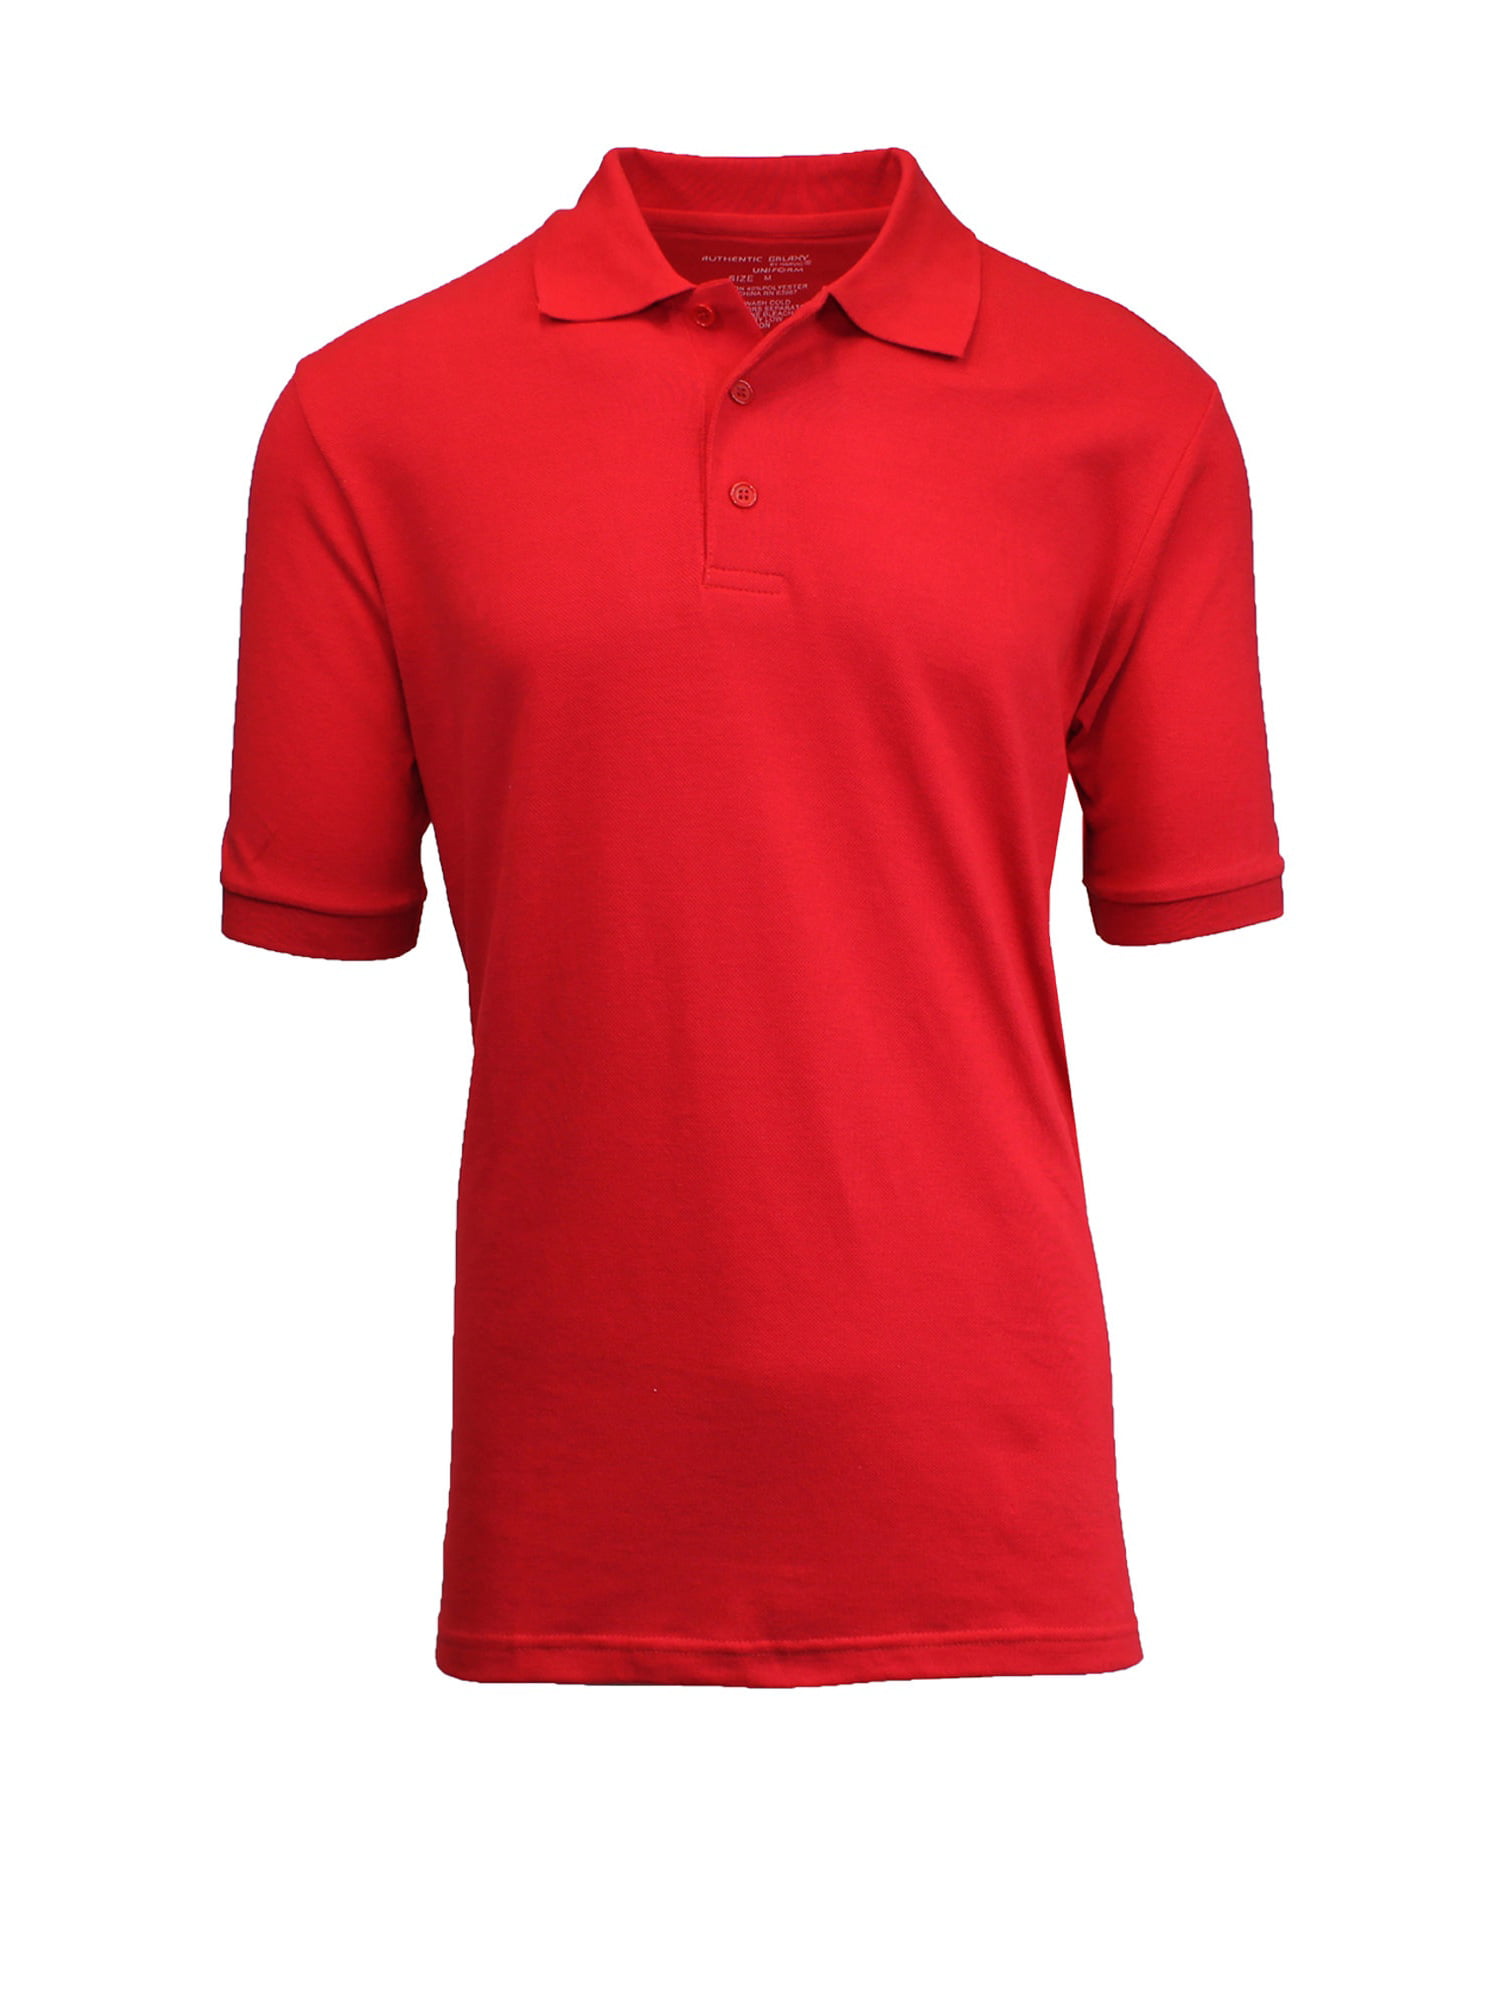 Classic Short-Sleeved Piqué Polo - Ready-to-Wear 1A2IJZ